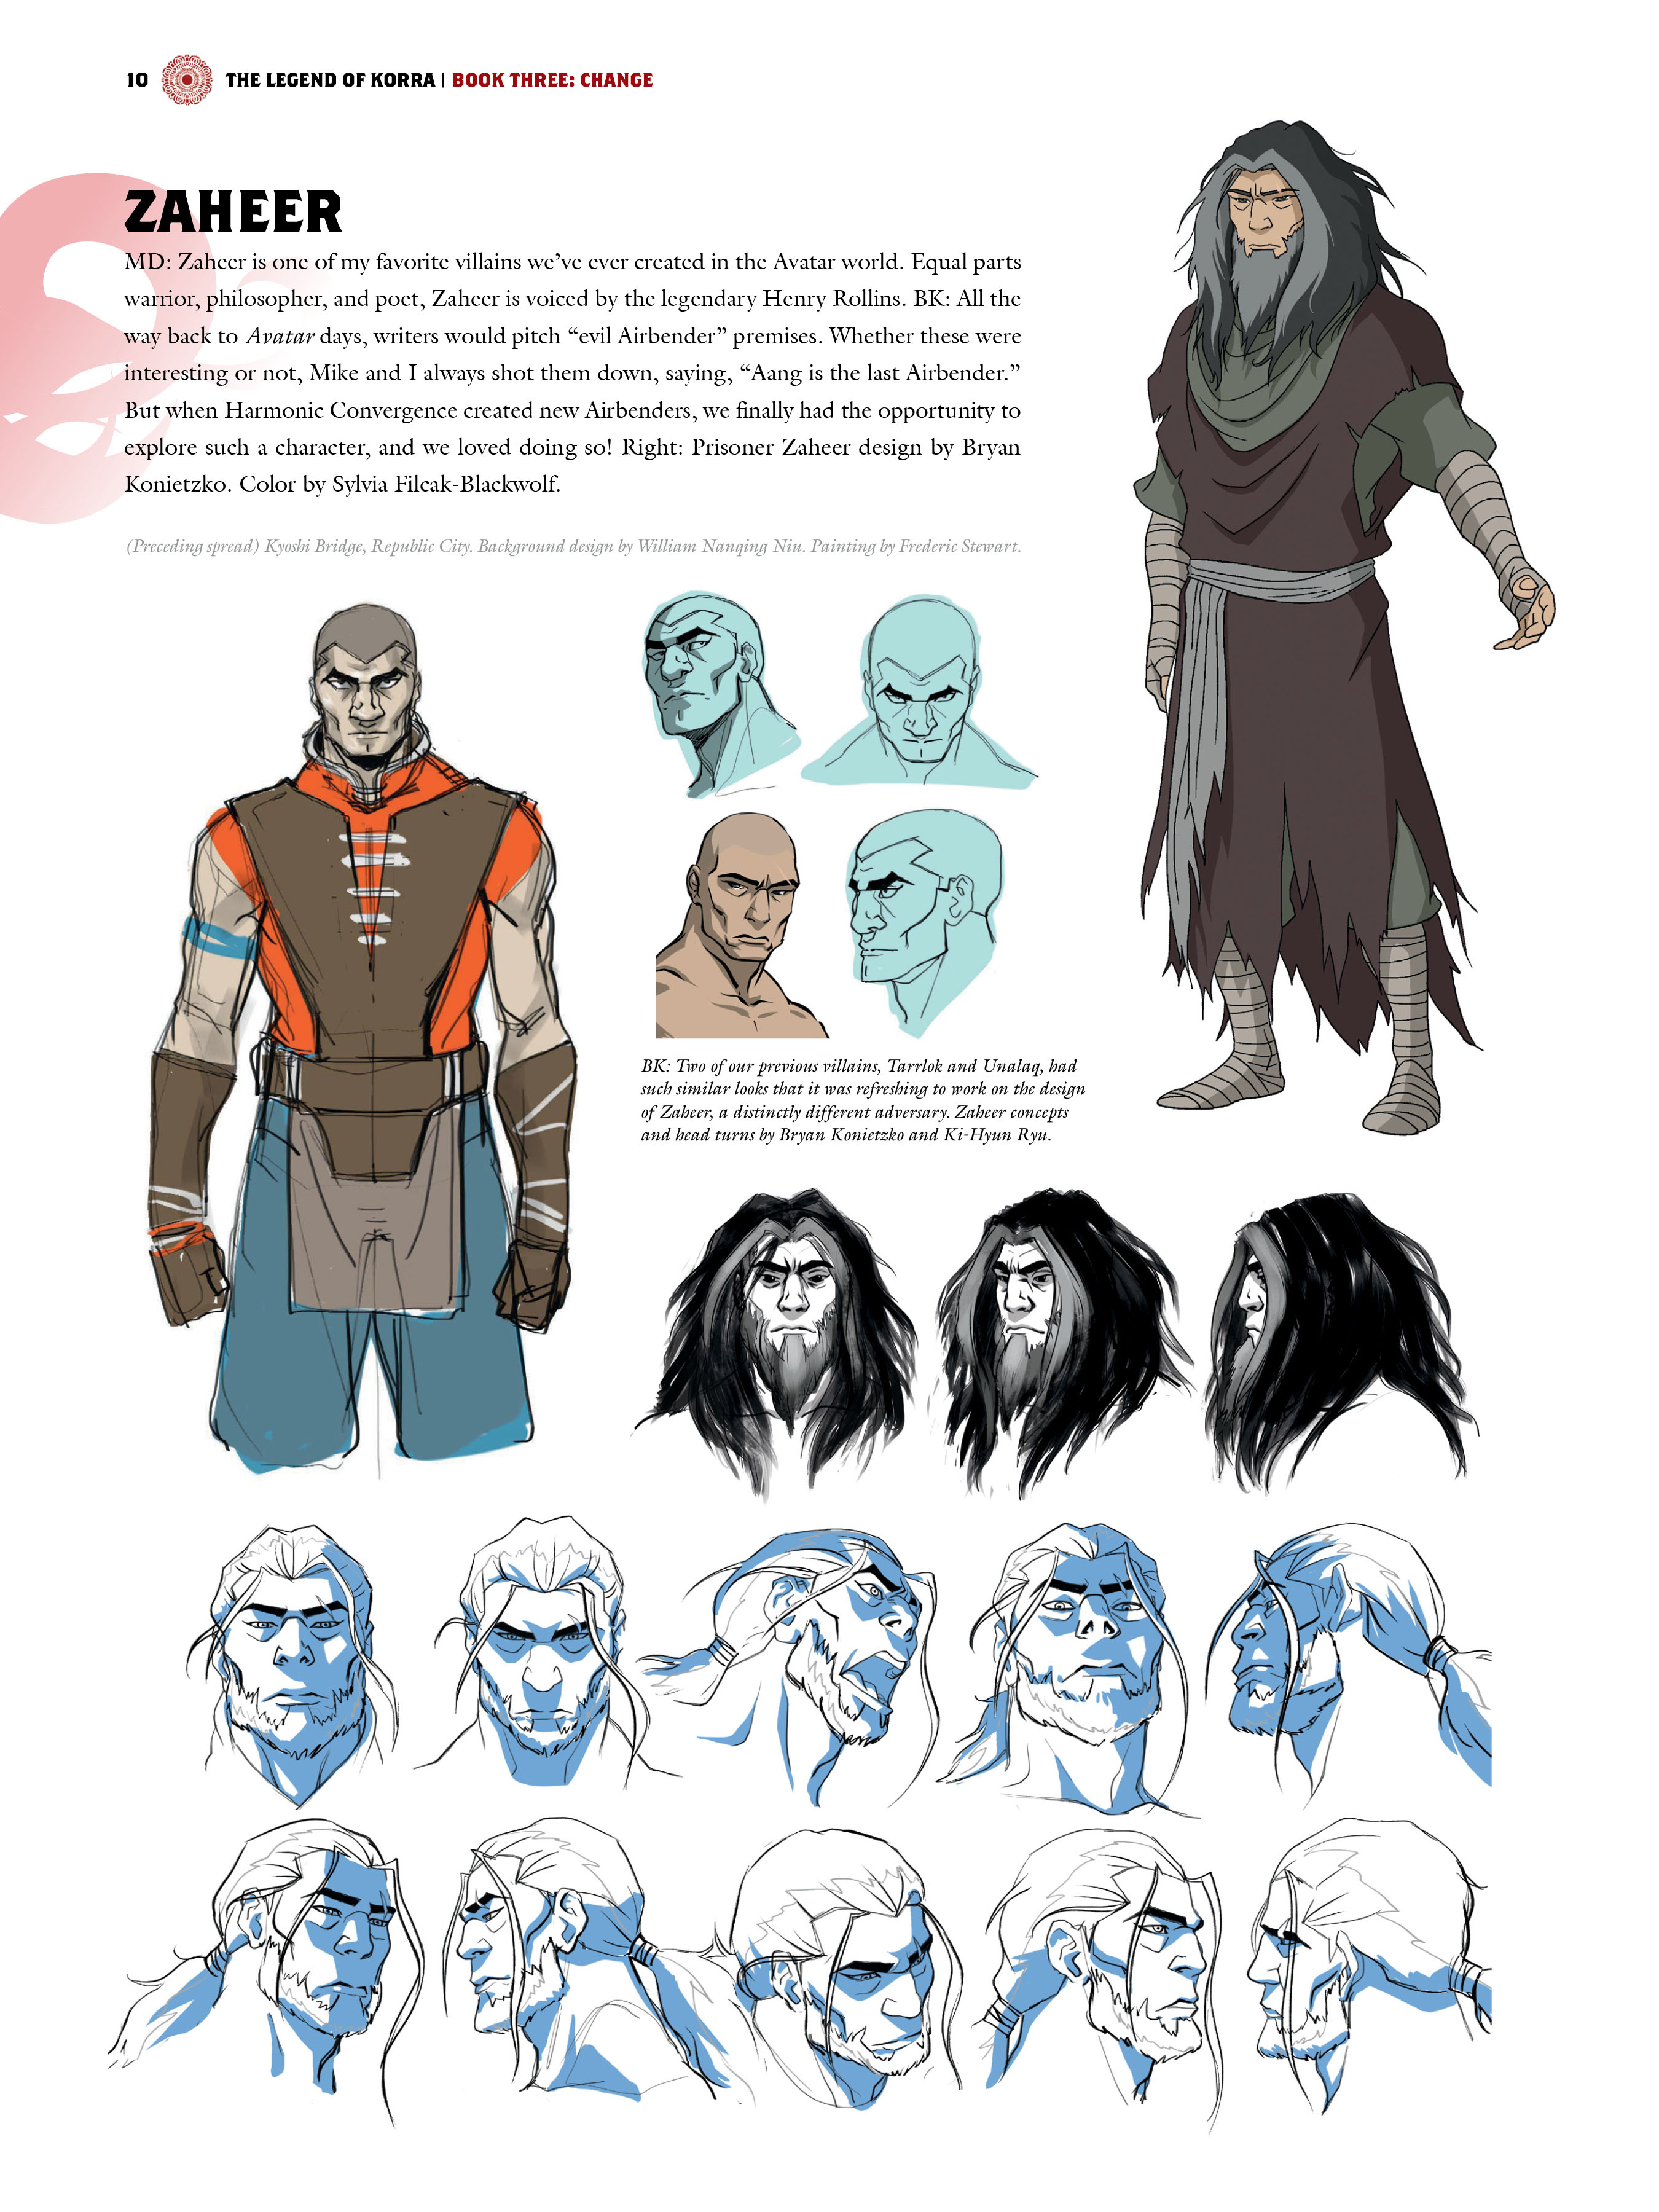 Read online The Legend of Korra: The Art of the Animated Series comic -  Issue # TPB 3 - 11